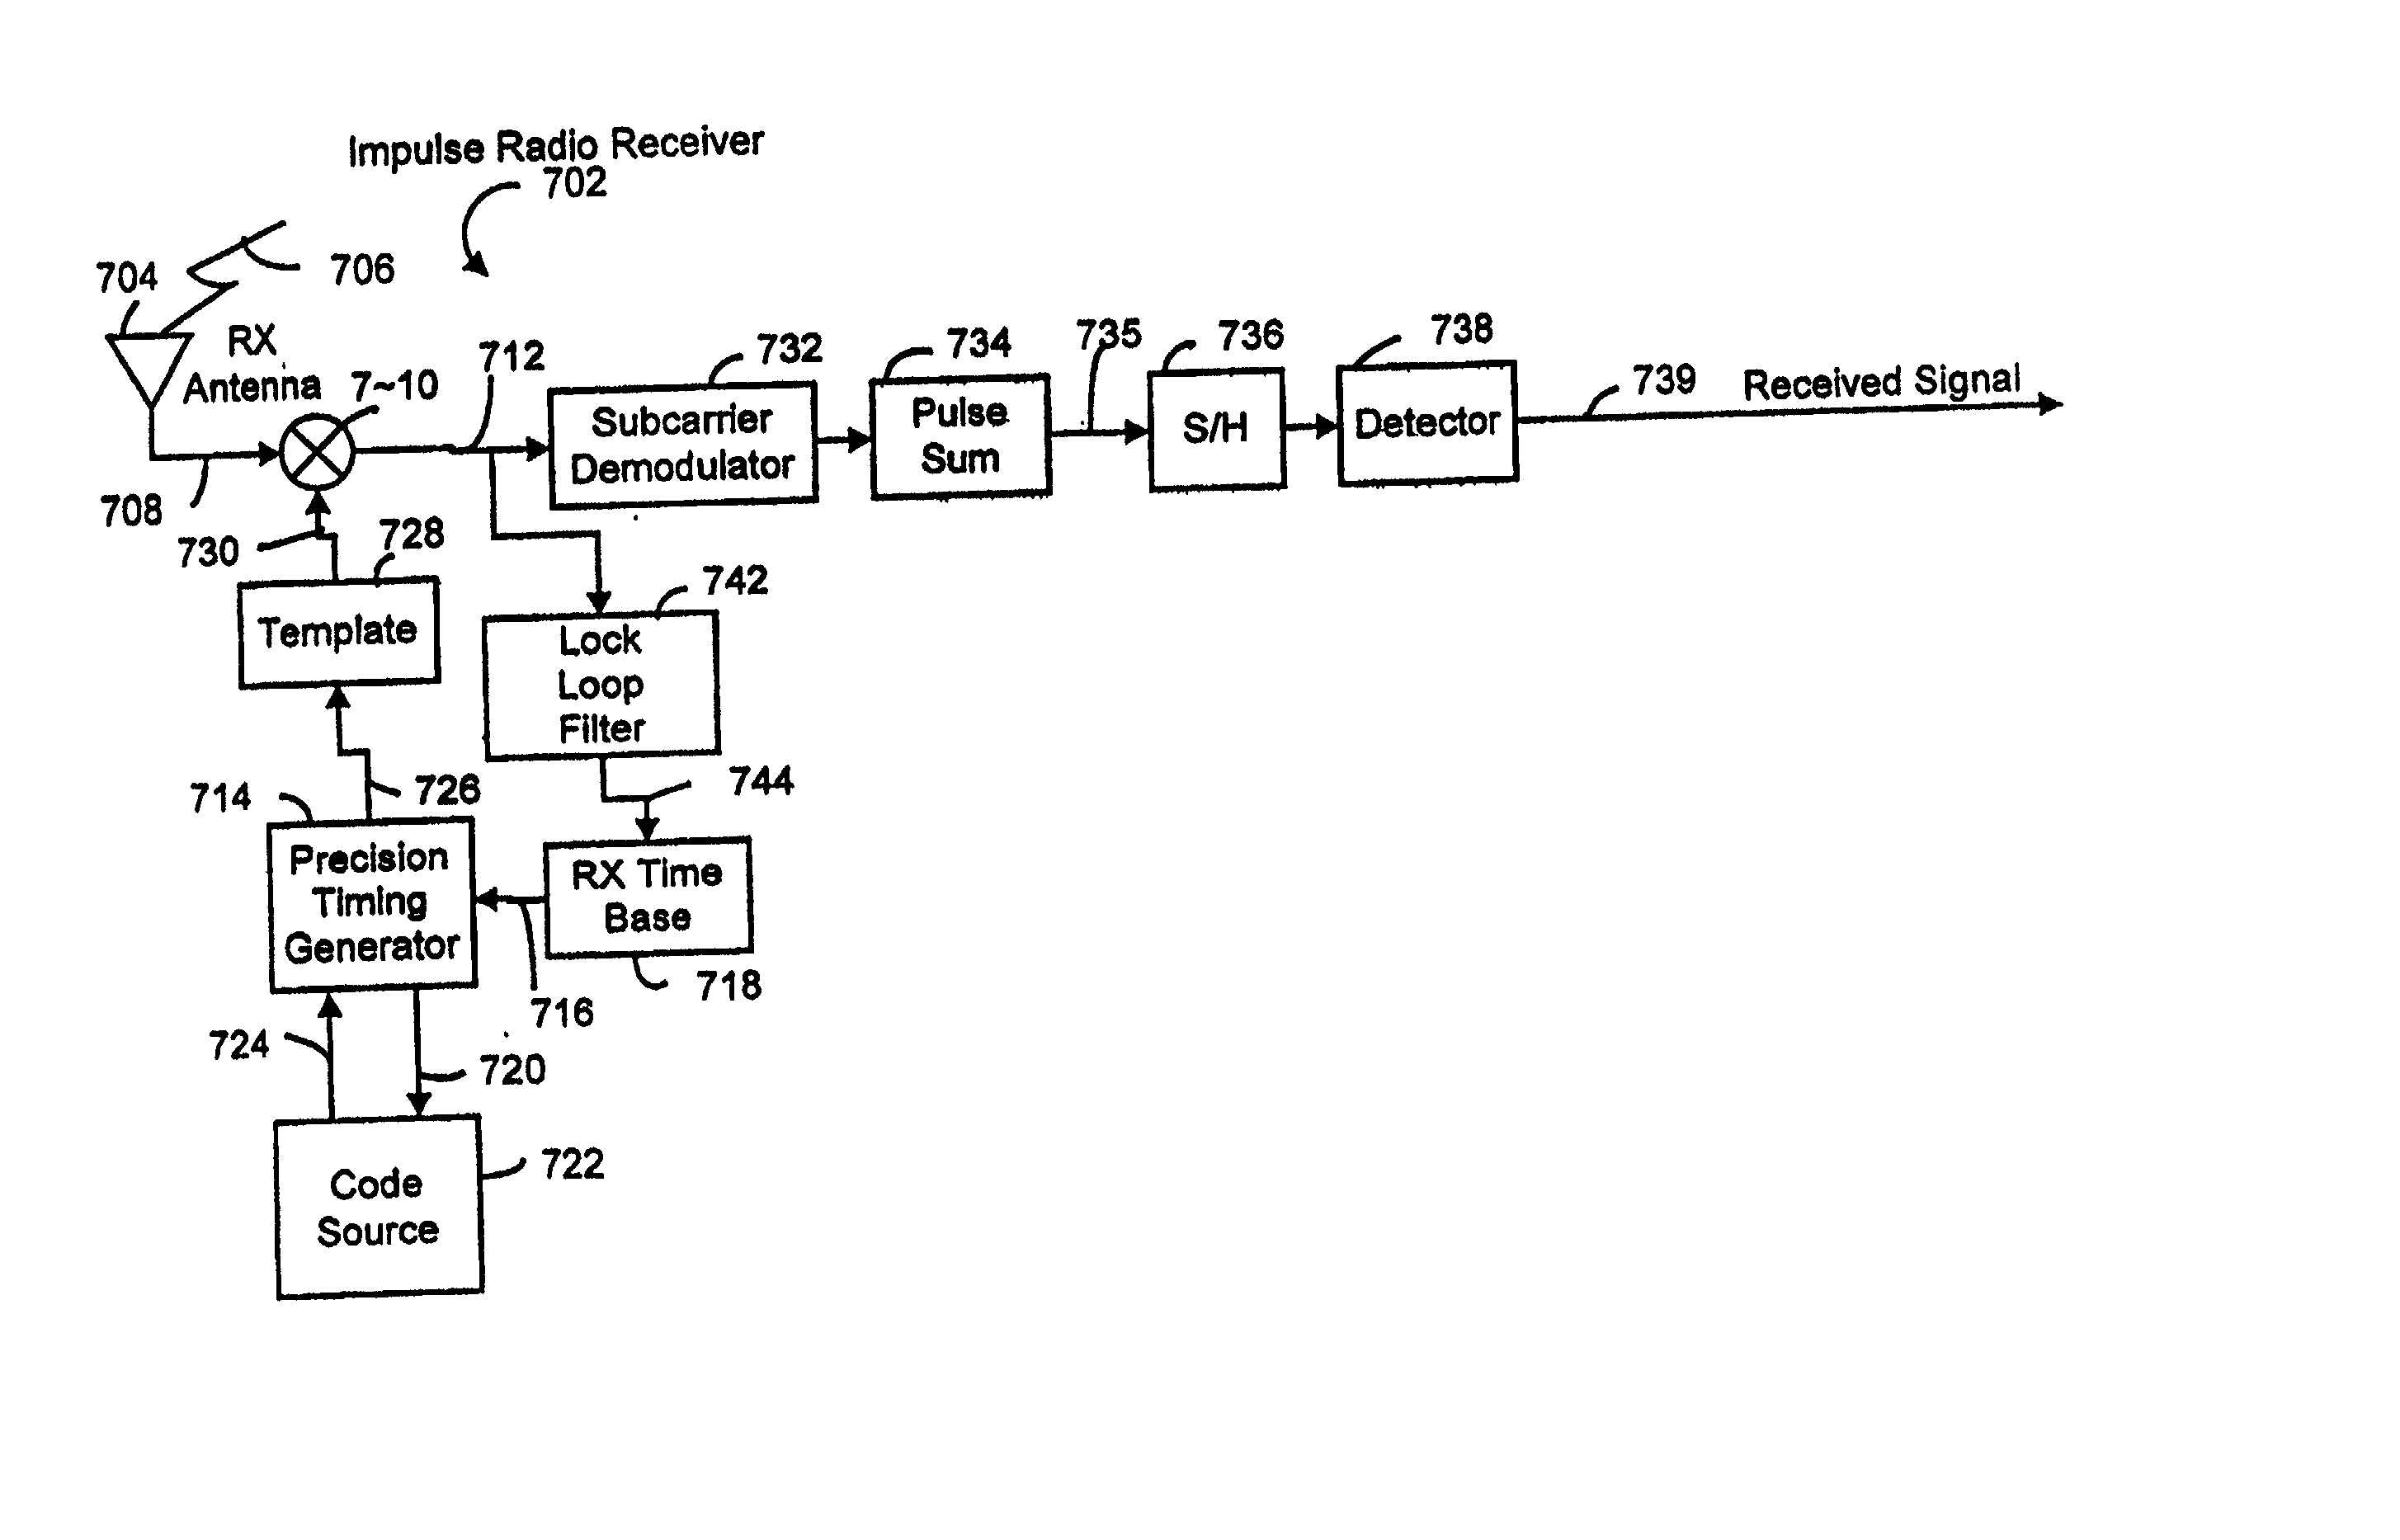 Method and apparatus for enabling communication and synchronization between an information processing device and a personal digital assistant using impulse radio wireless techniques